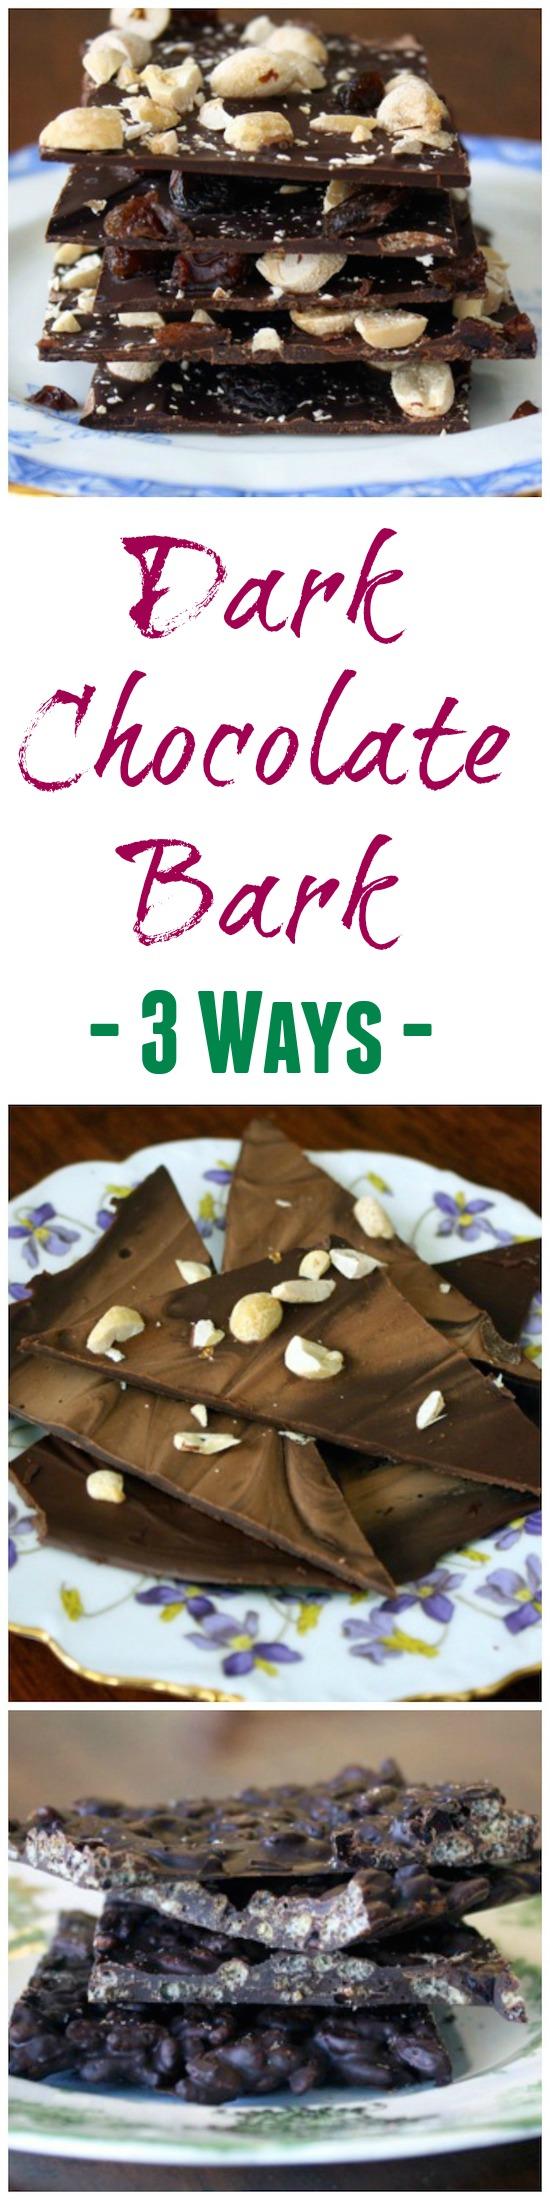 Make this dark chocolate bark for an after dinner treat. Here are three versions to make this dessert a hit with everyone!